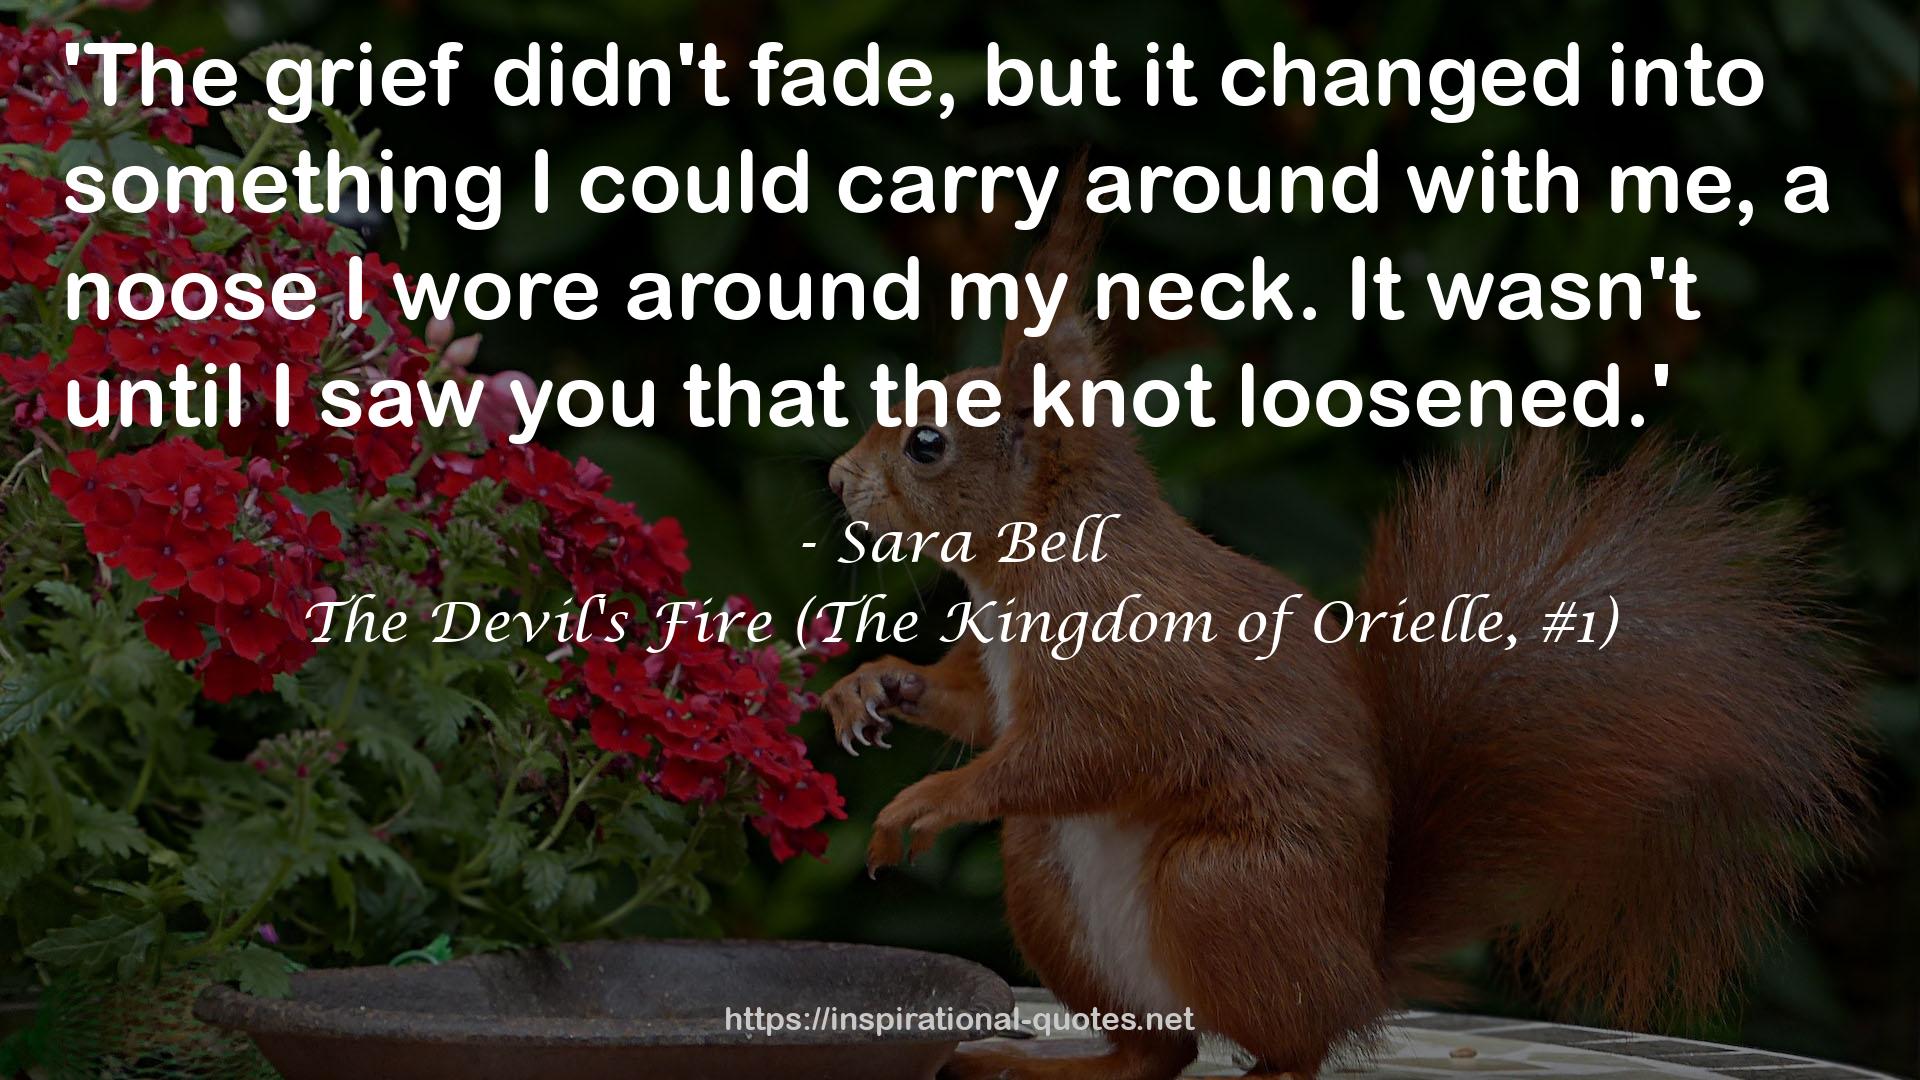 Sara Bell QUOTES